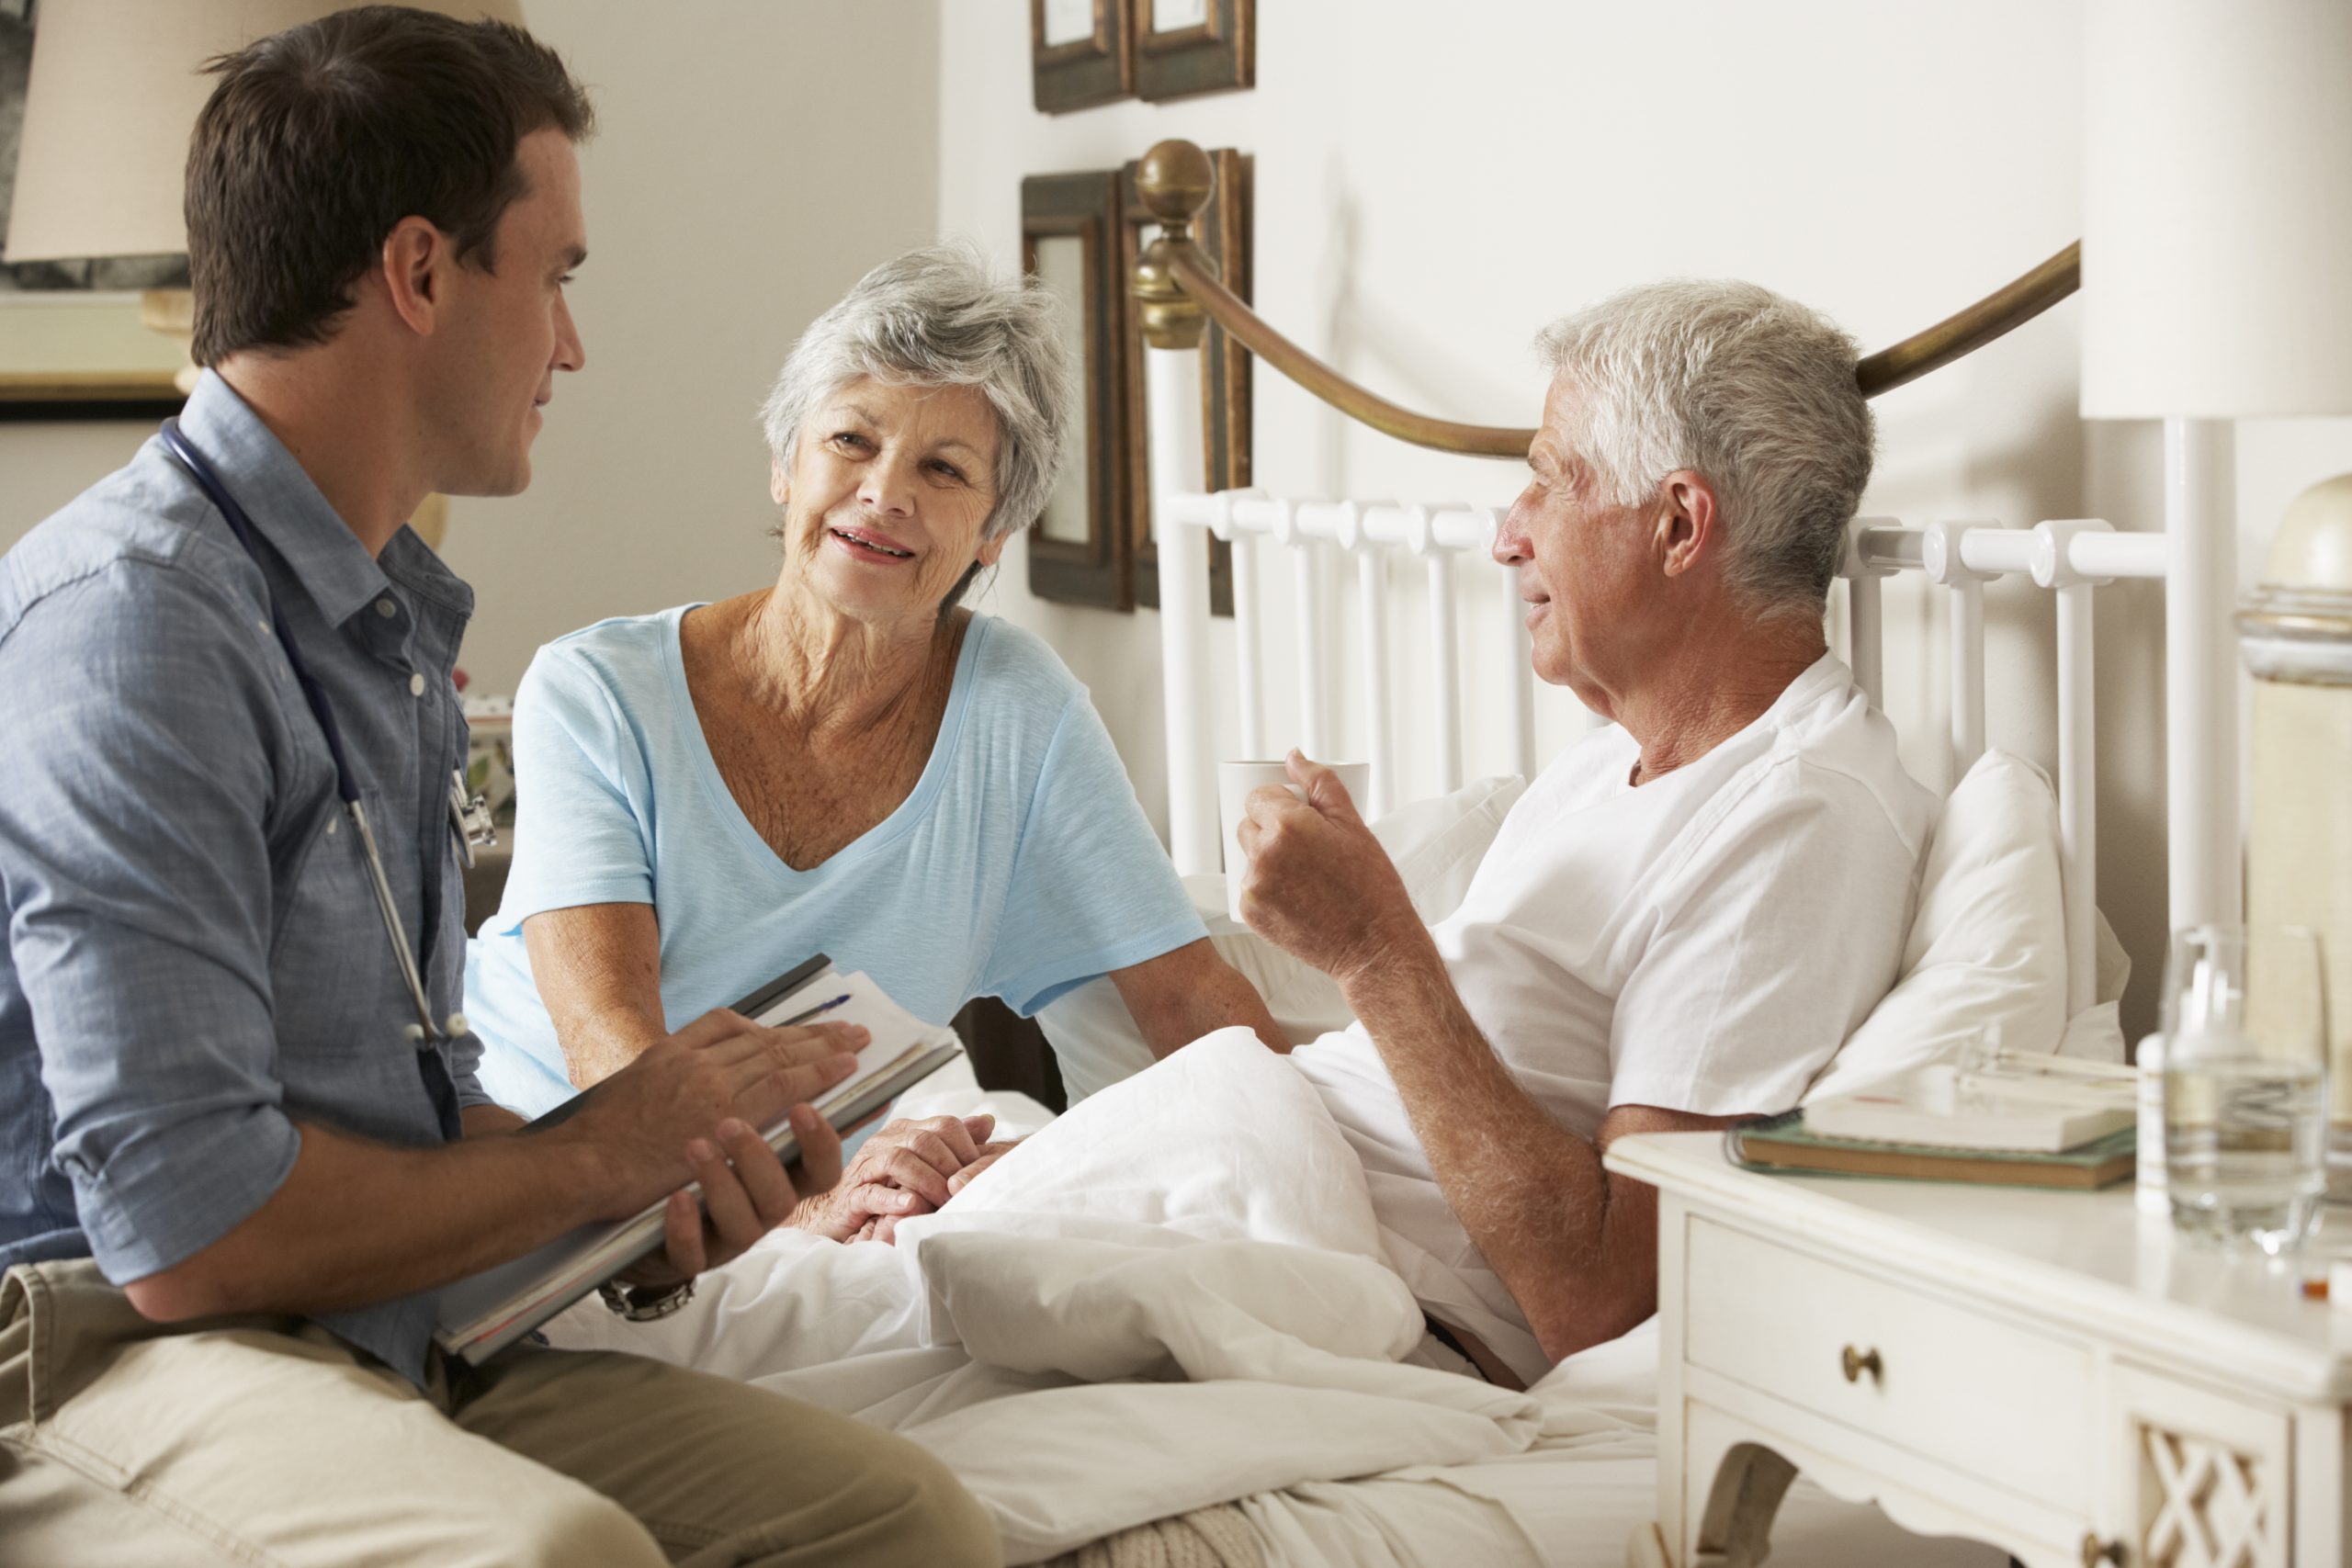 Caring for elderly Australians in a home-like setting can reduce hospital visits